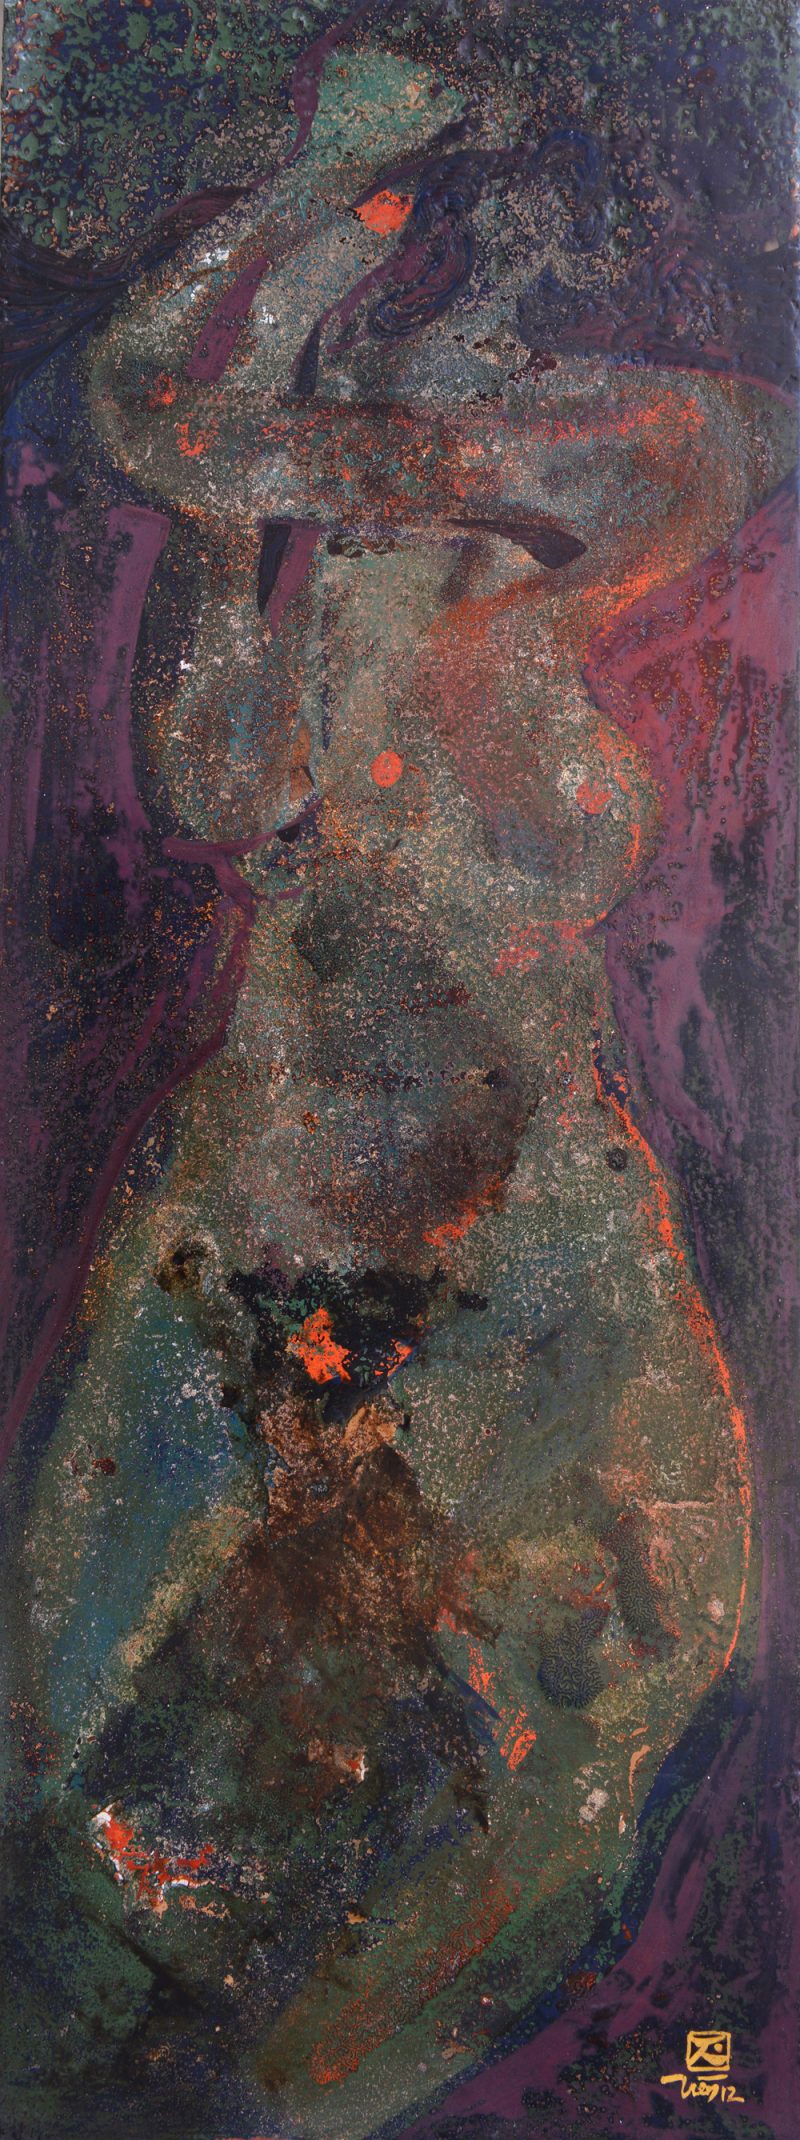 Nude IV - Vietnamese Lacquer Painting on Wood by Artist Trieu Khac Tien